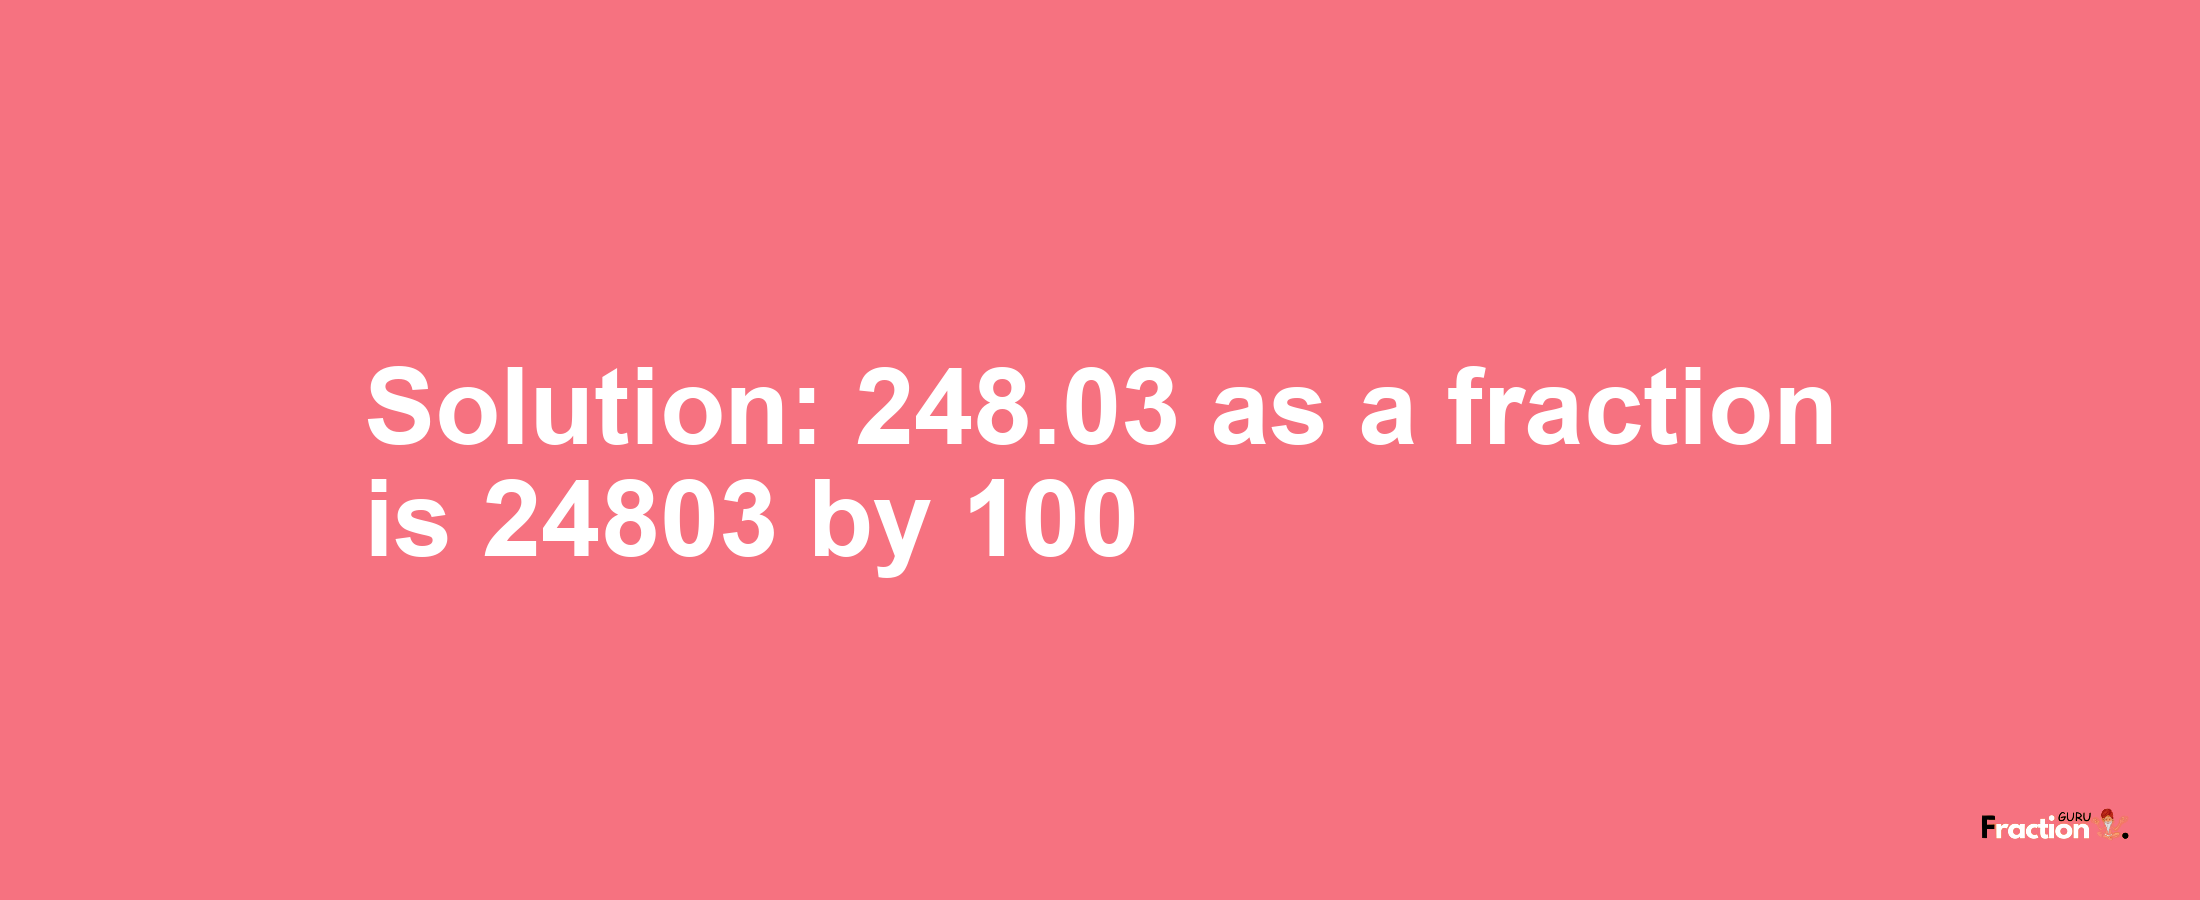 Solution:248.03 as a fraction is 24803/100